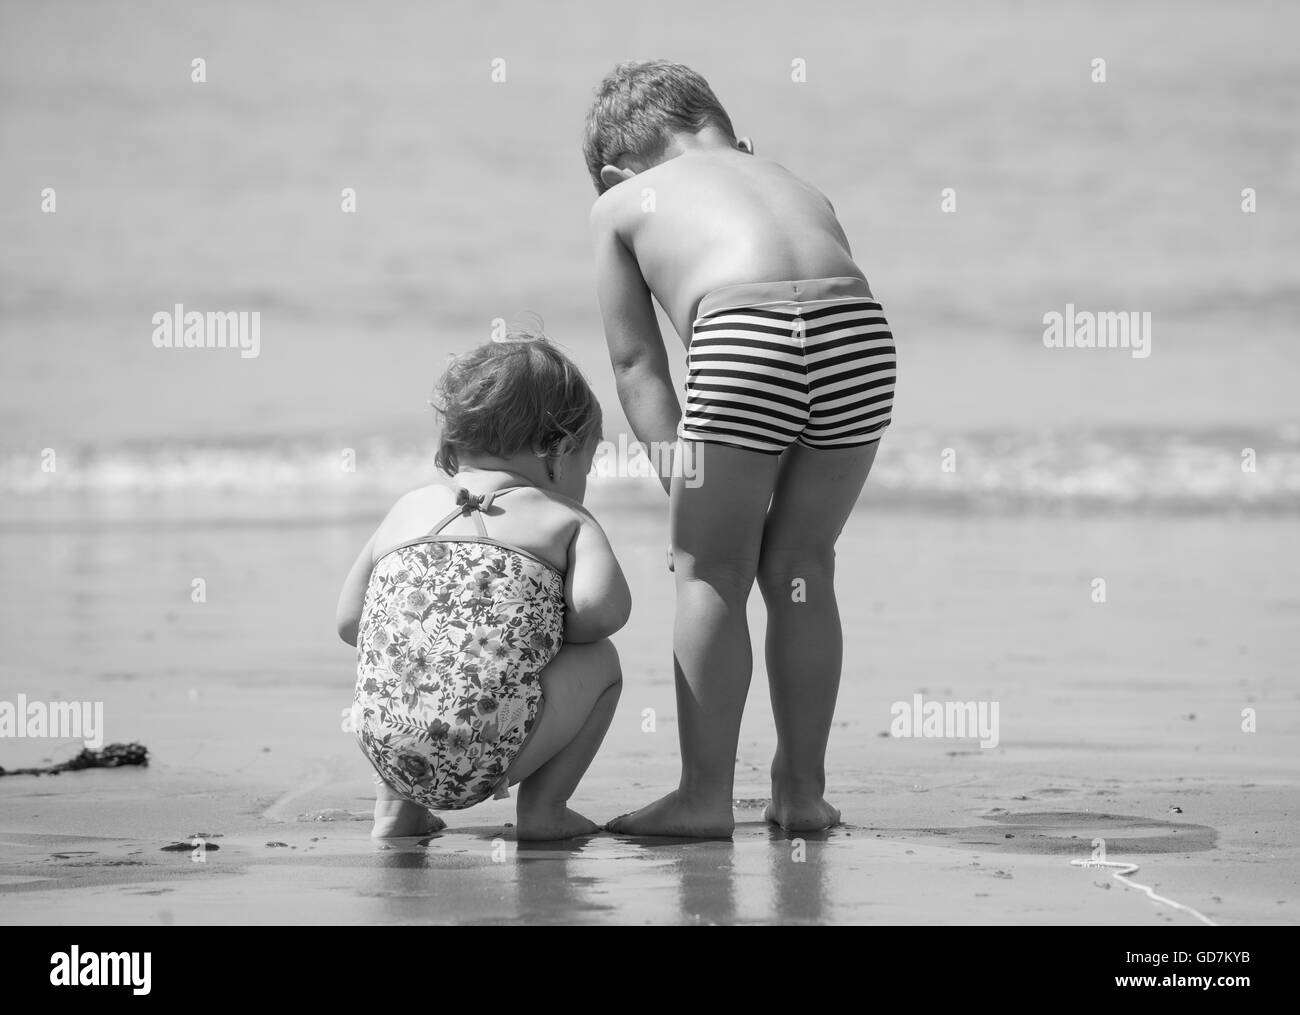 brother and sister family in the sand on holiday vacation discovering and exploring the beach black and white retro style Stock Photo